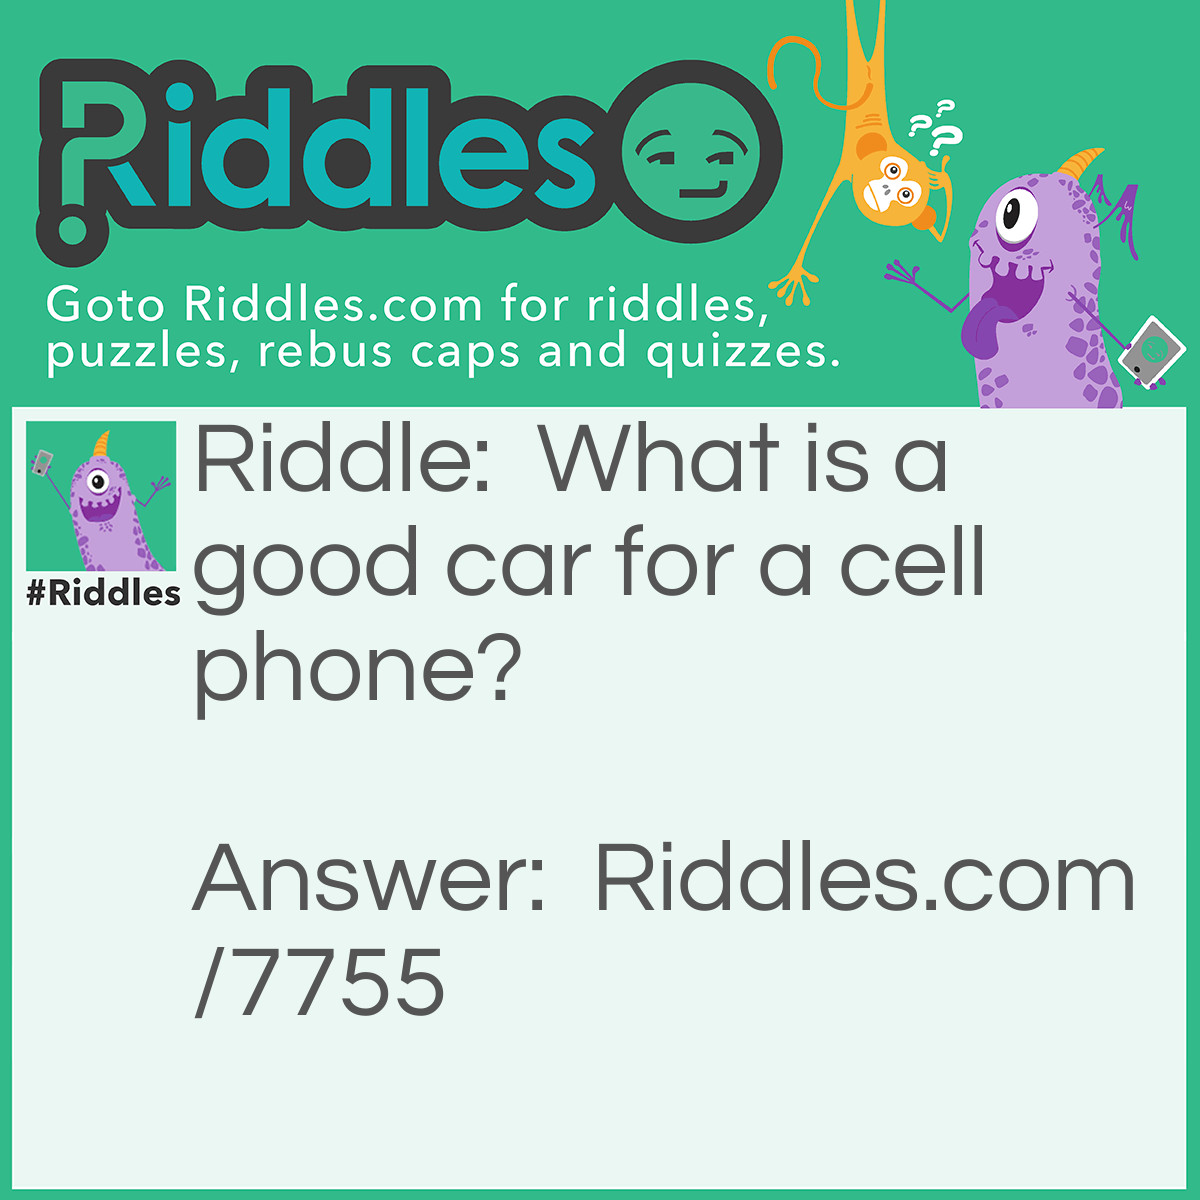 Riddle: What is a good car for a cell phone? Answer: A Charger.